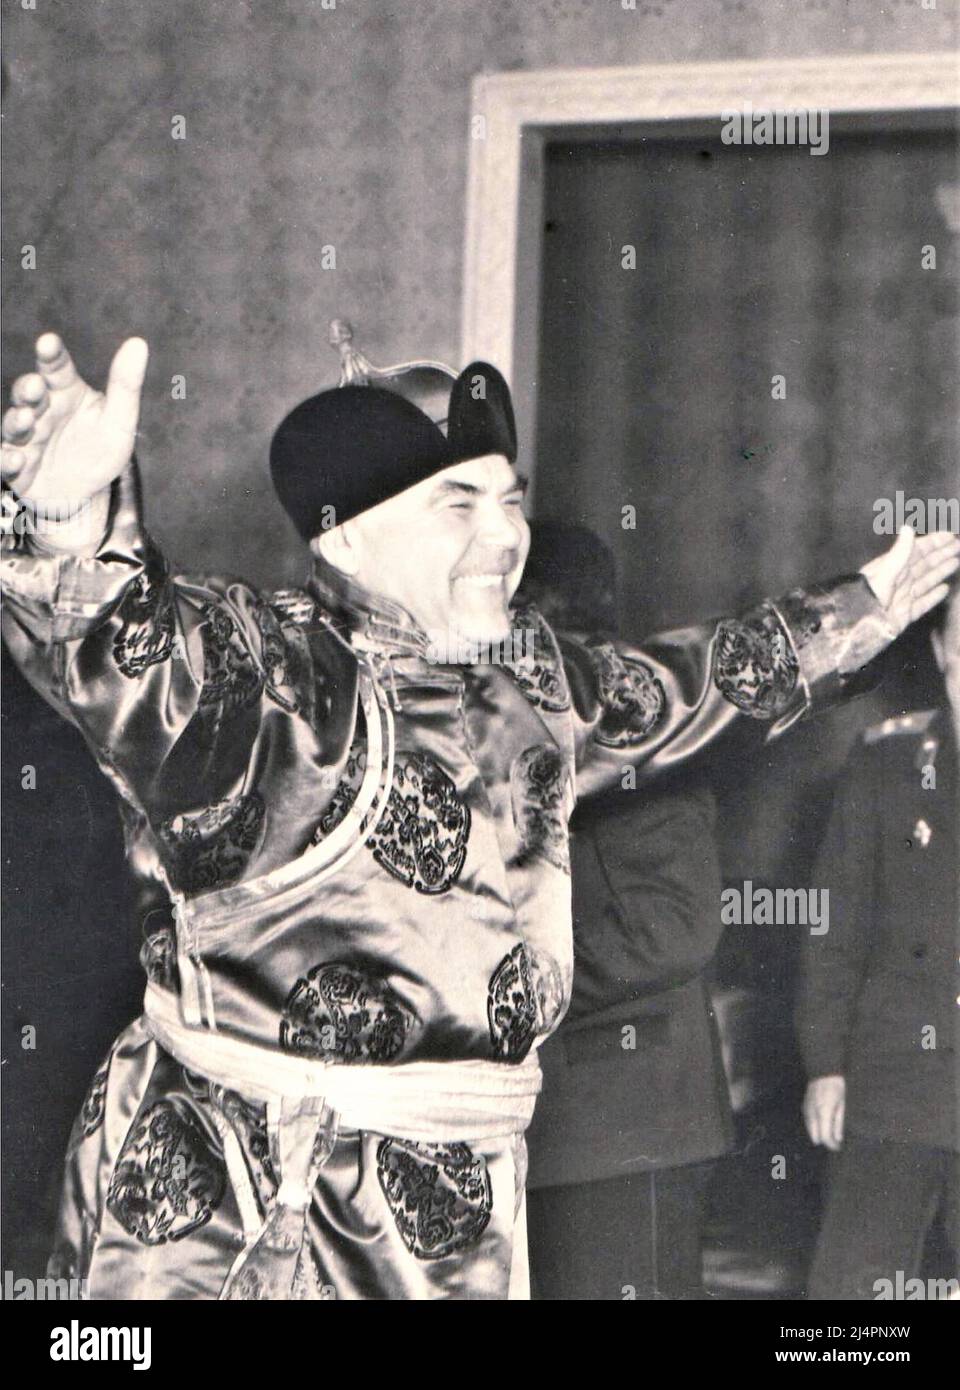 Marshal of the Soviet Union Rodion Malinovsky as Minister of Defence wearing traditional Mongolian clothing during an official visit to Mongolia, 1961 Stock Photo